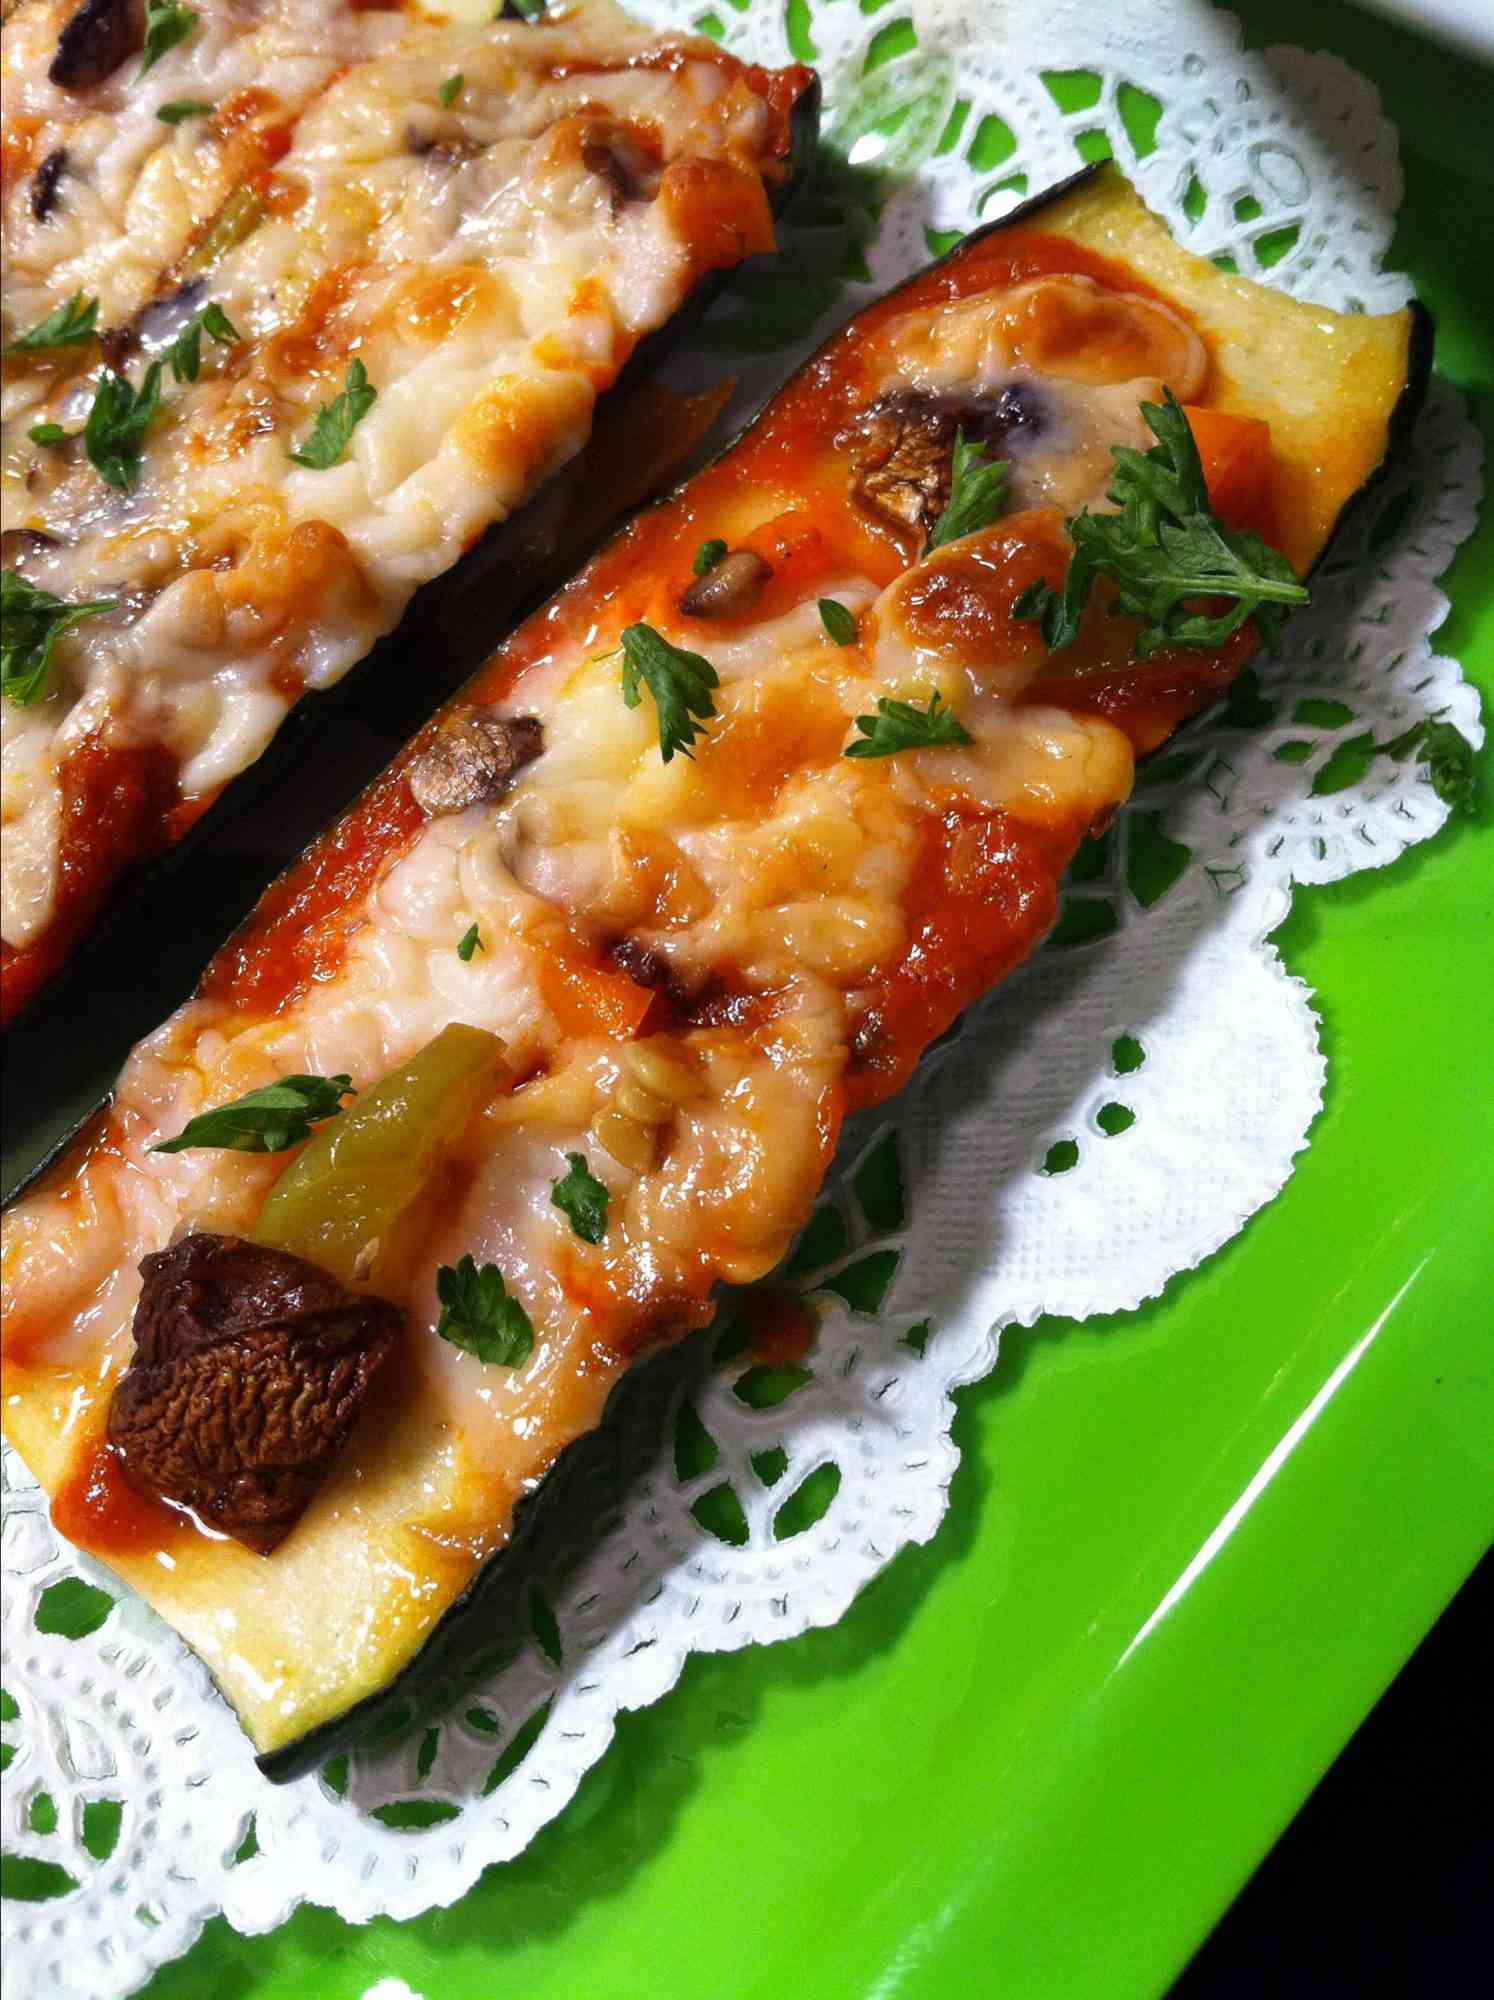 Grilled Zucchini Pizza with Goat Cheese